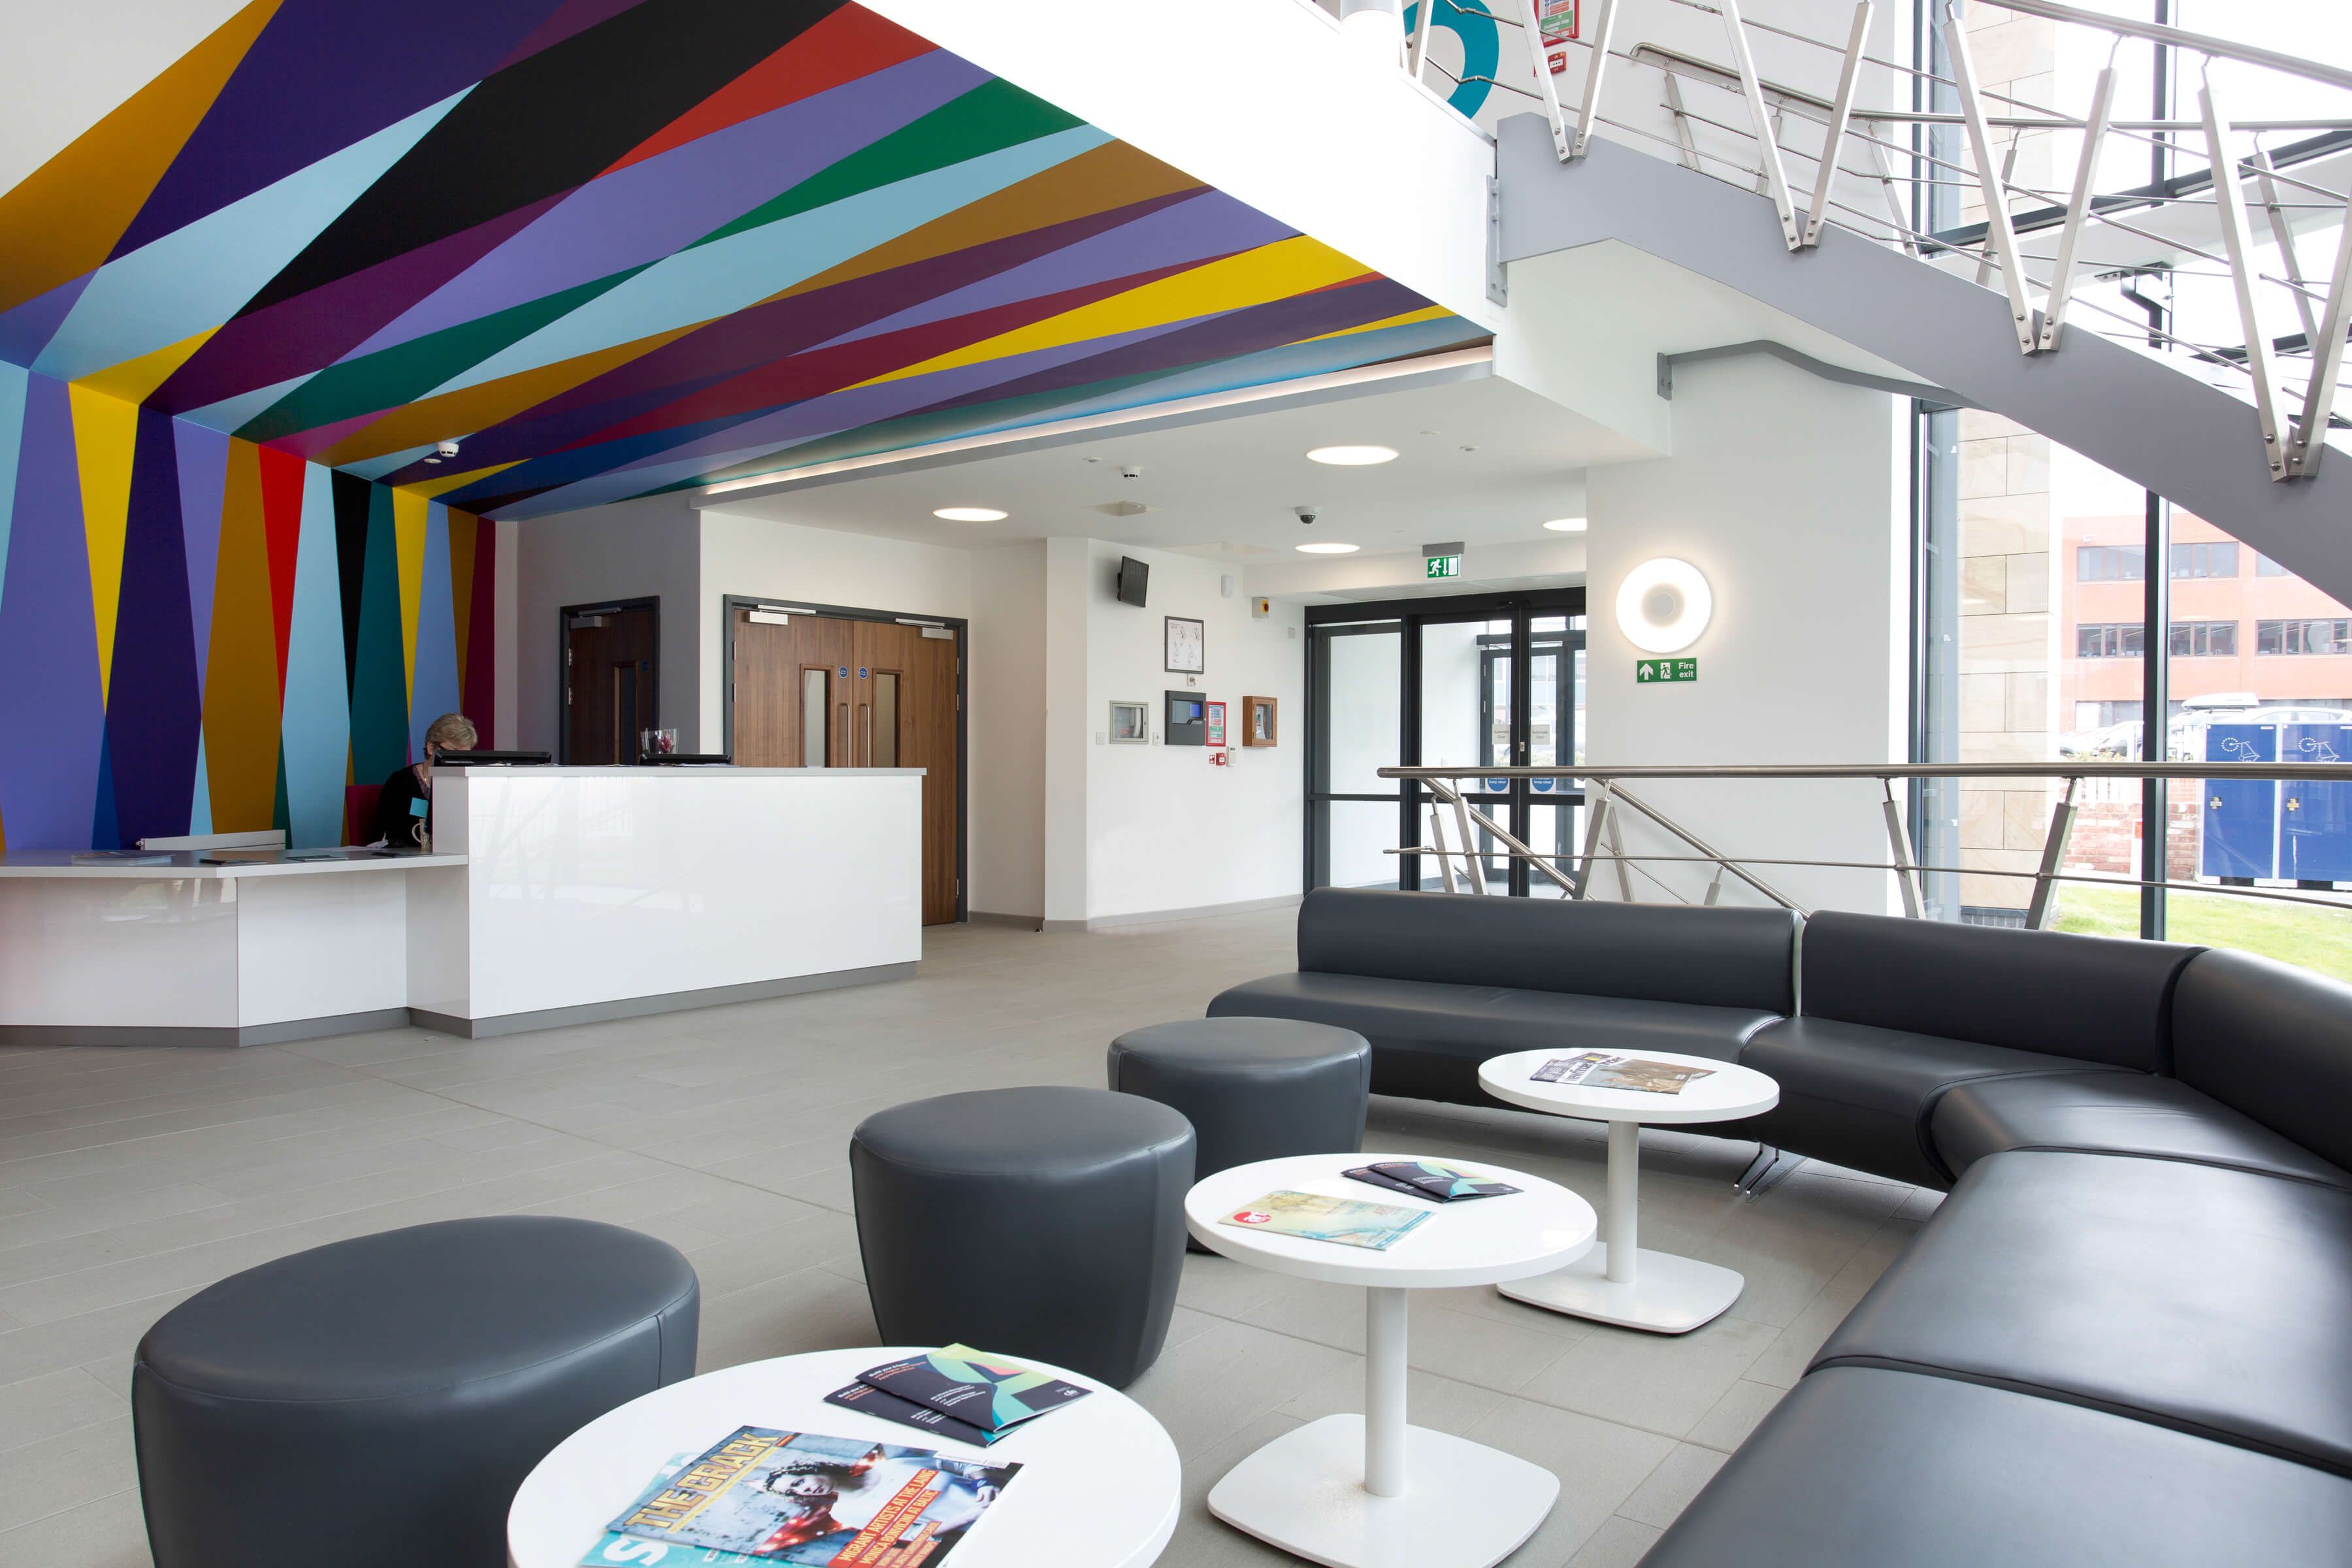 Main reception of Hope Street Xchange, featuring reception desk and waiting area